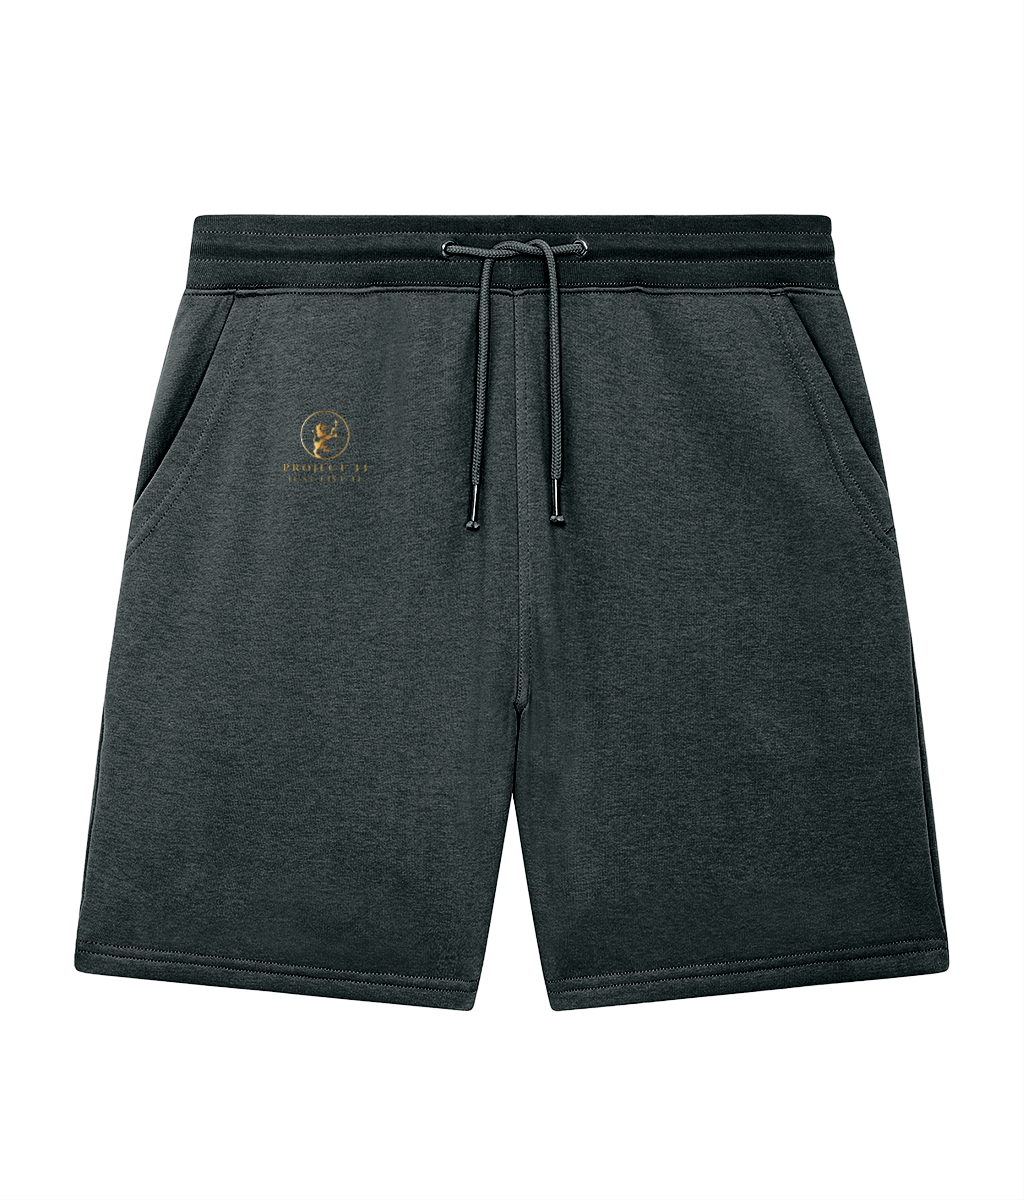 project 33 Unisex Terry Shorts